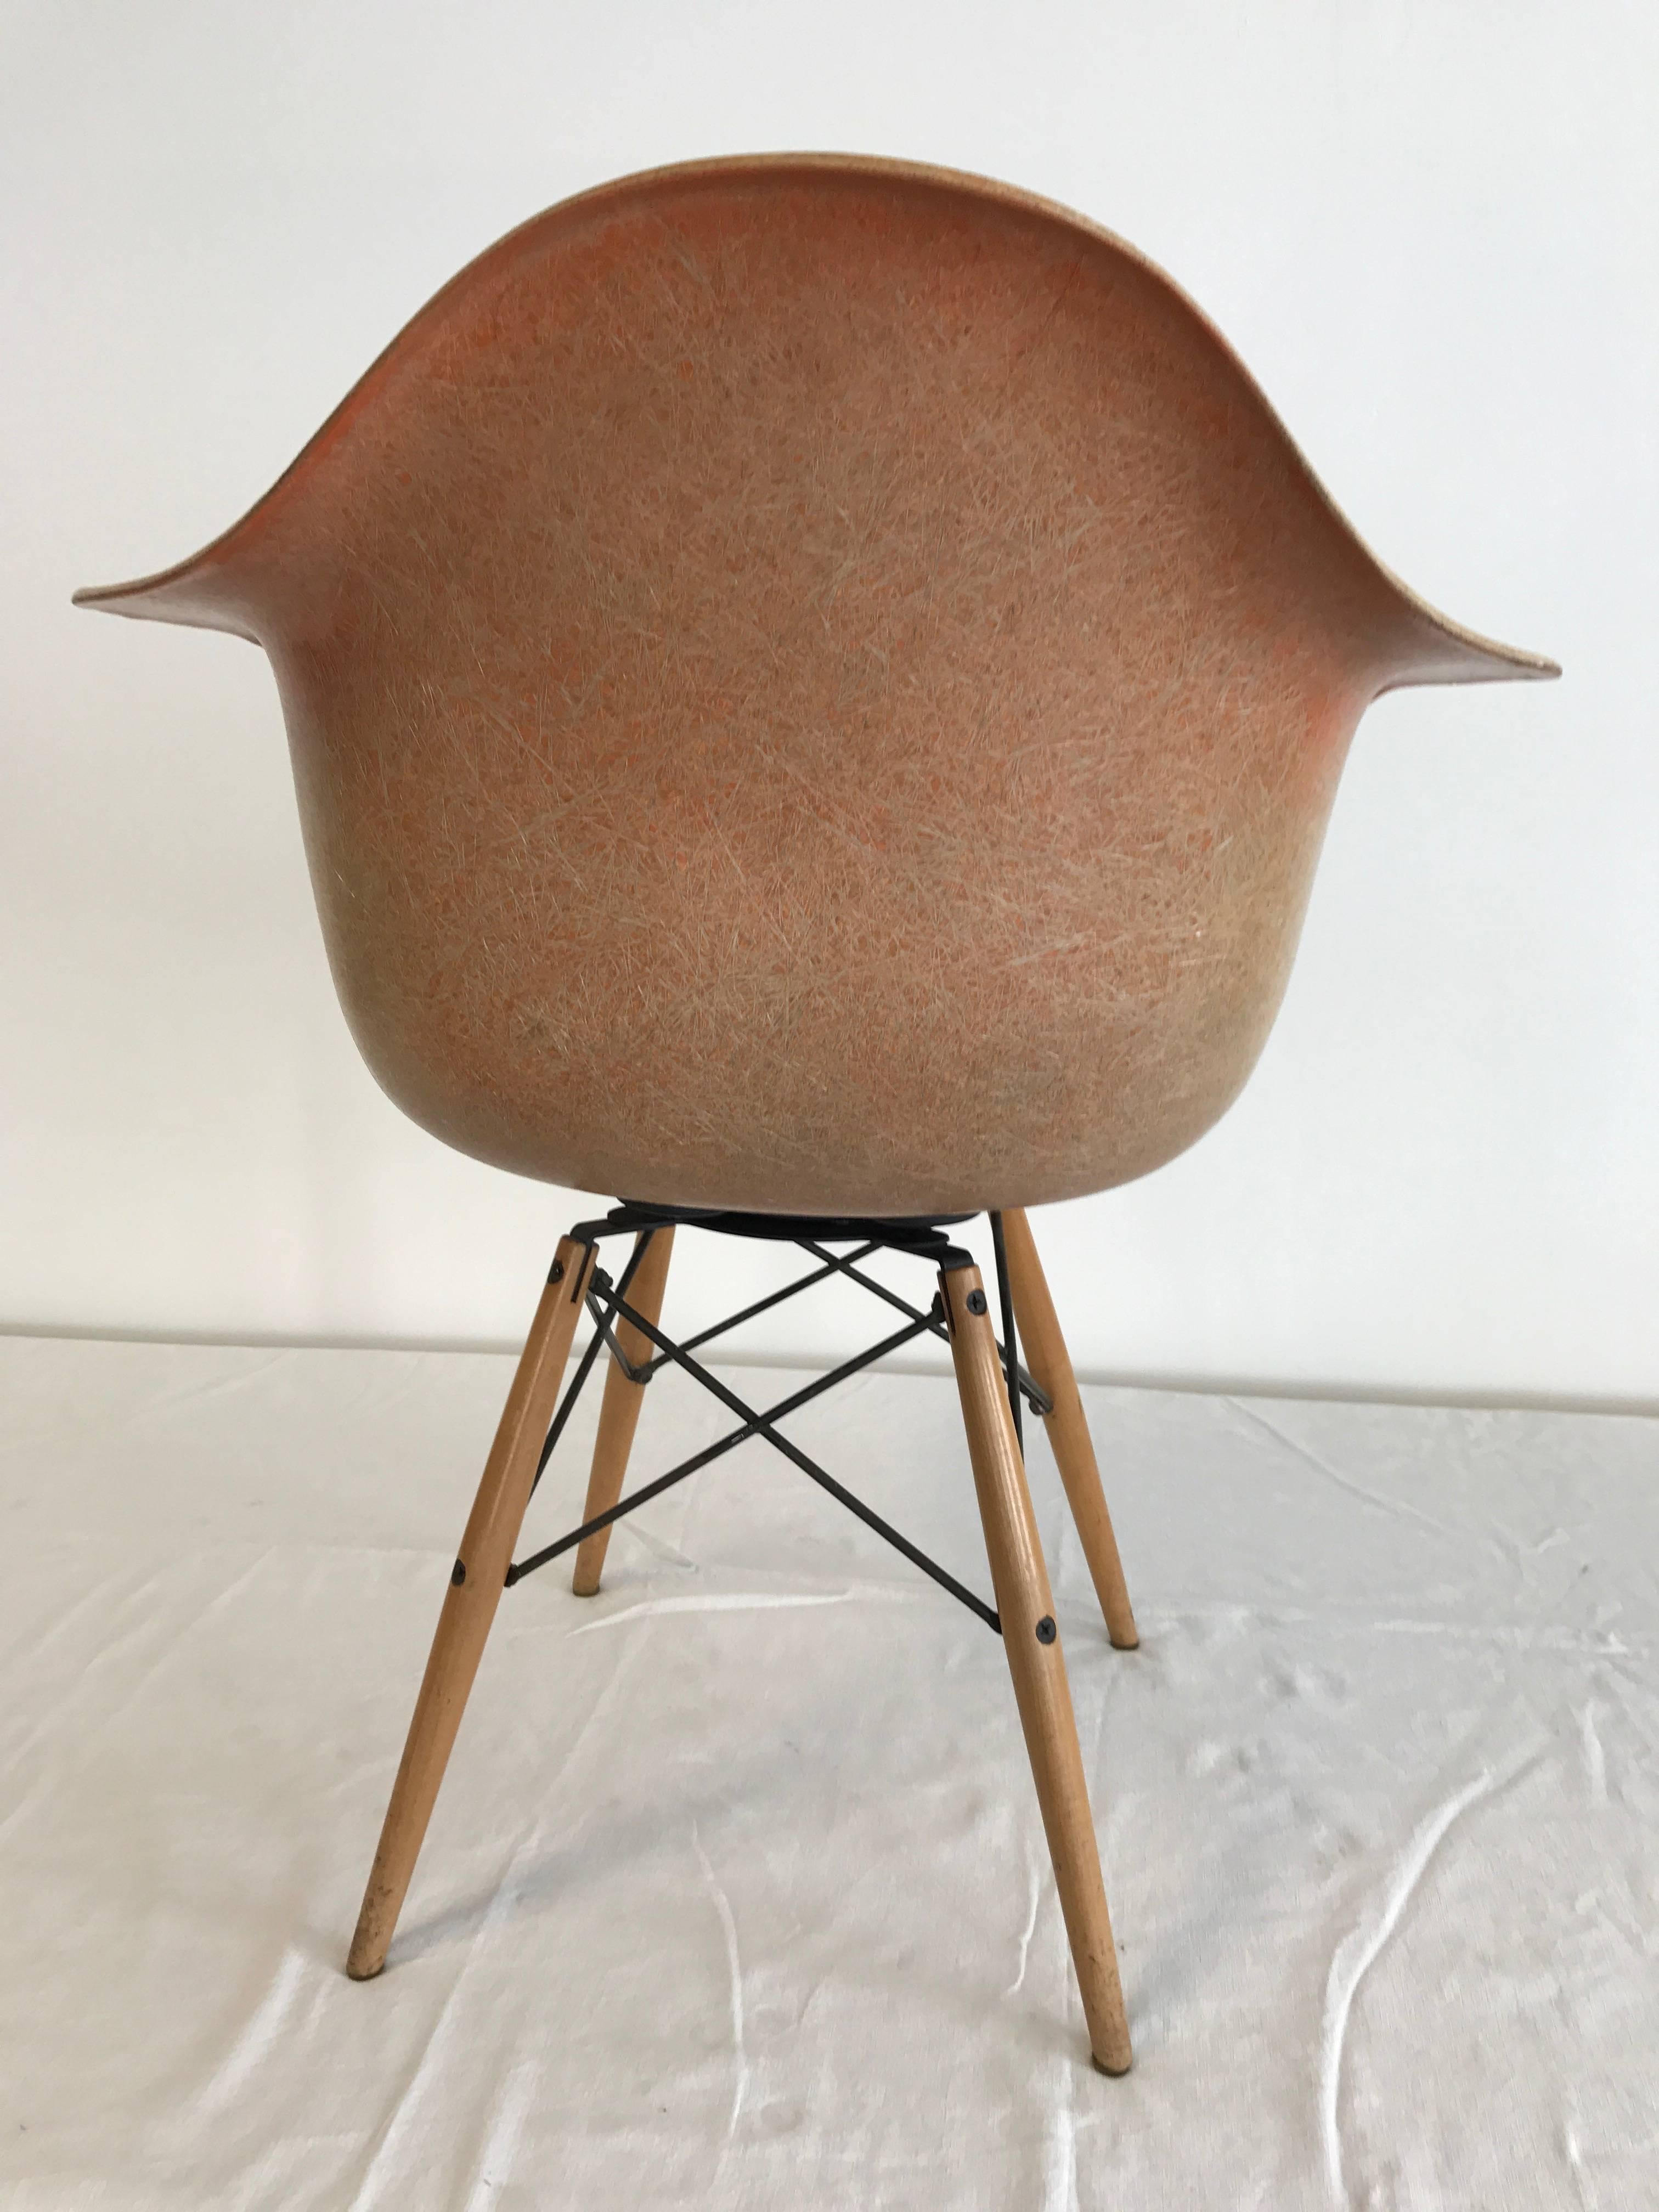 Second series after 1950 Zenith Herman Miller / Charles Eames PAW Swivel chair in color salmon (faded) / dowel legs in birch / all original parts / the awesome dowel base reads Seng Chicago on the metal portion/ fibre glass shell in color salmon